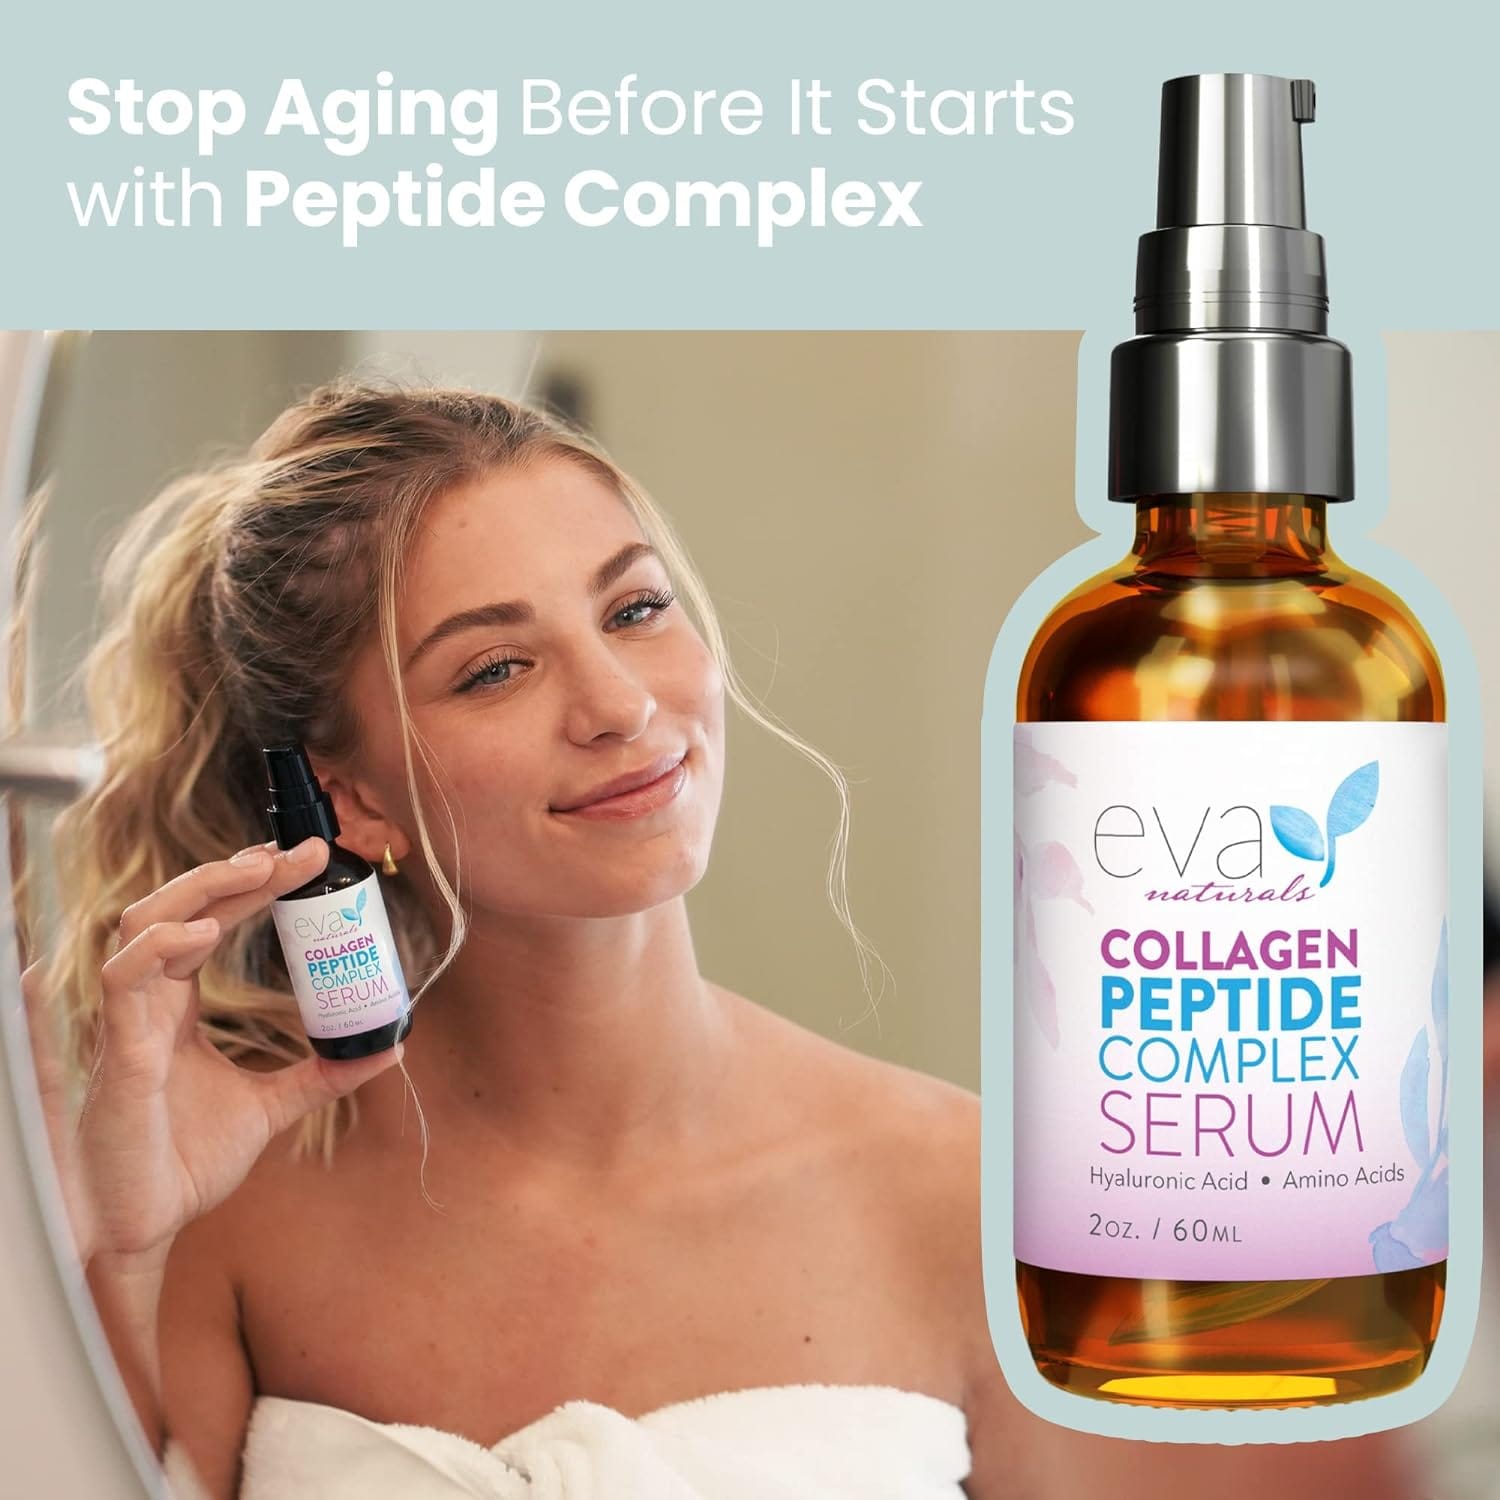 Discover the Secret to Age-Defying Skin With These Top Peptide Serums